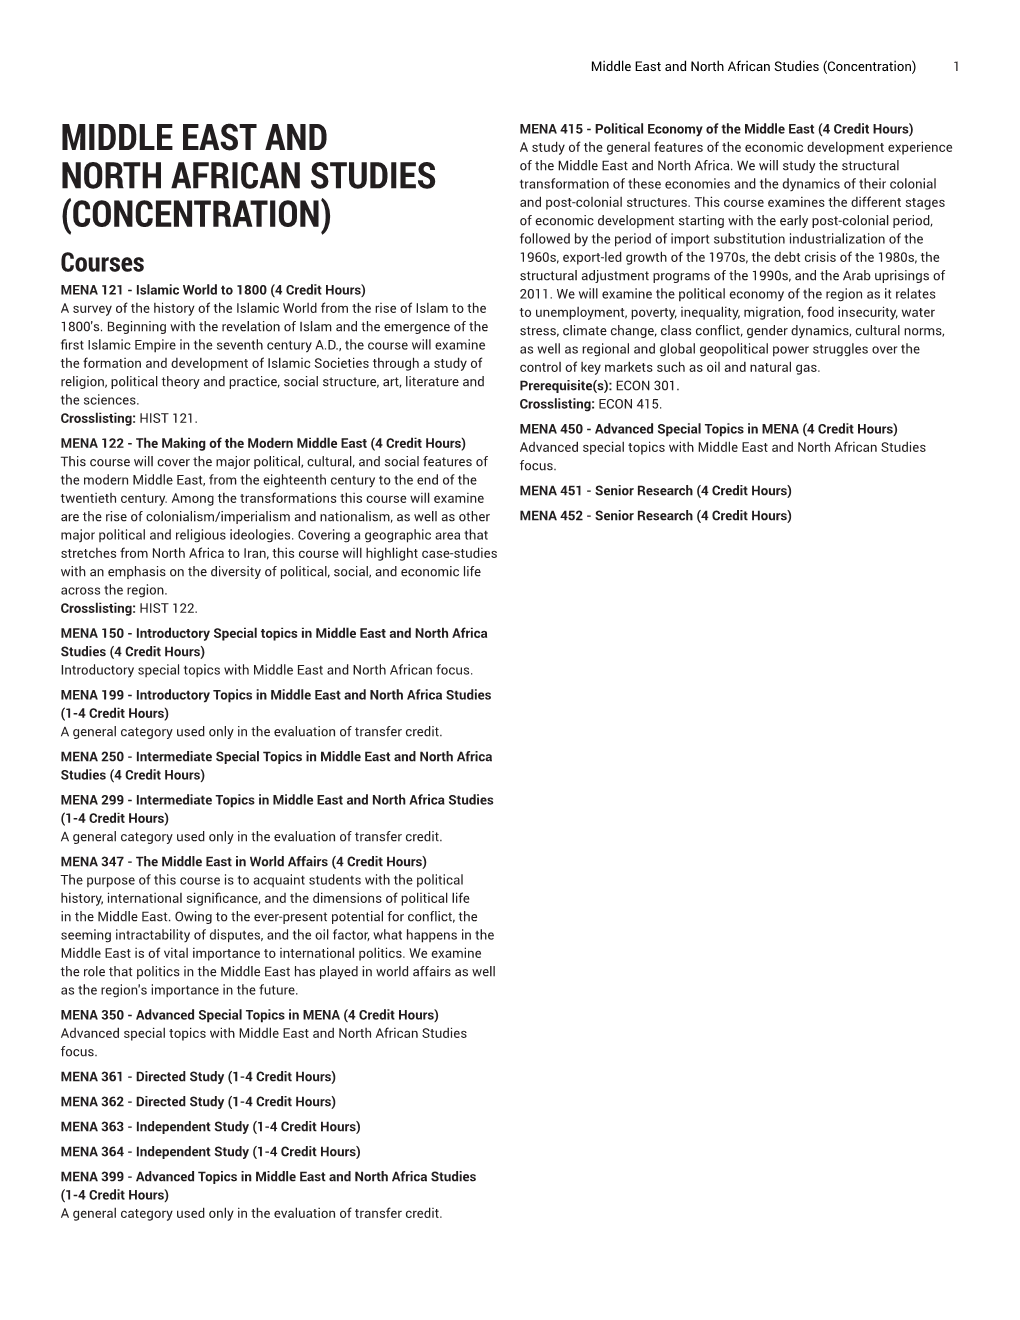 Middle East and North African Studies (Concentration) 1